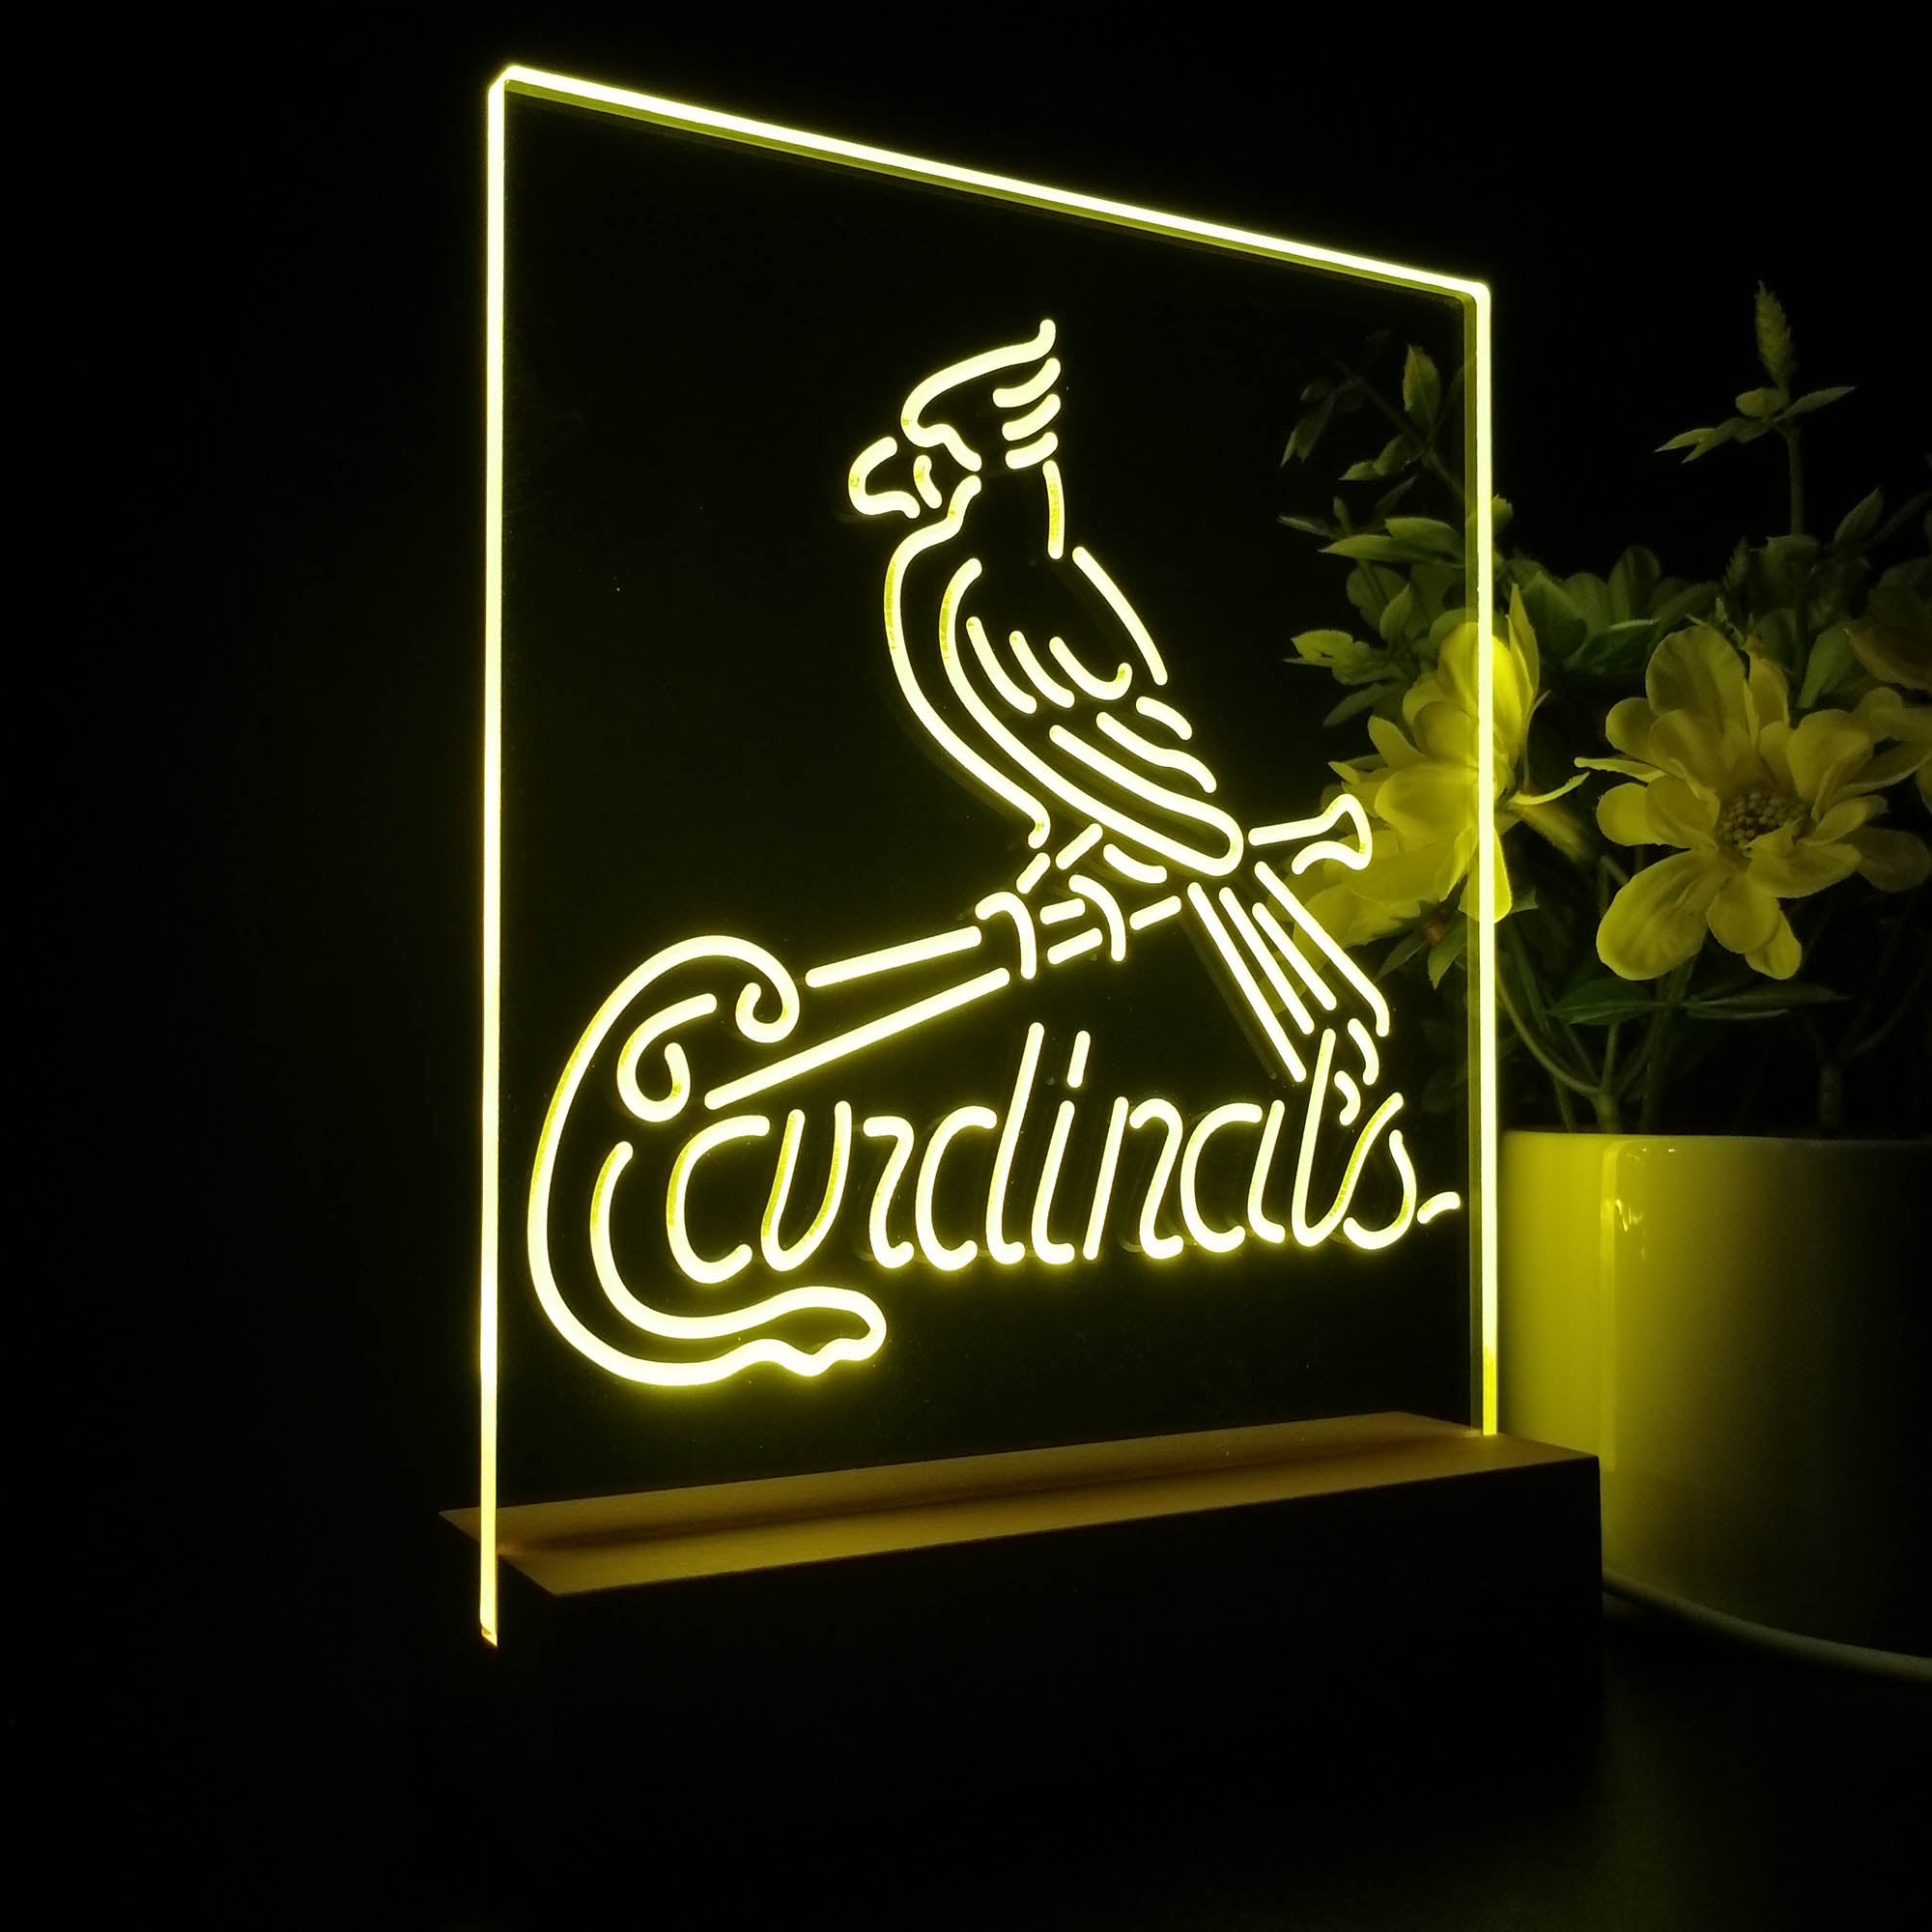 St. Louis Cardinals Neon-like LED Sign on sale!